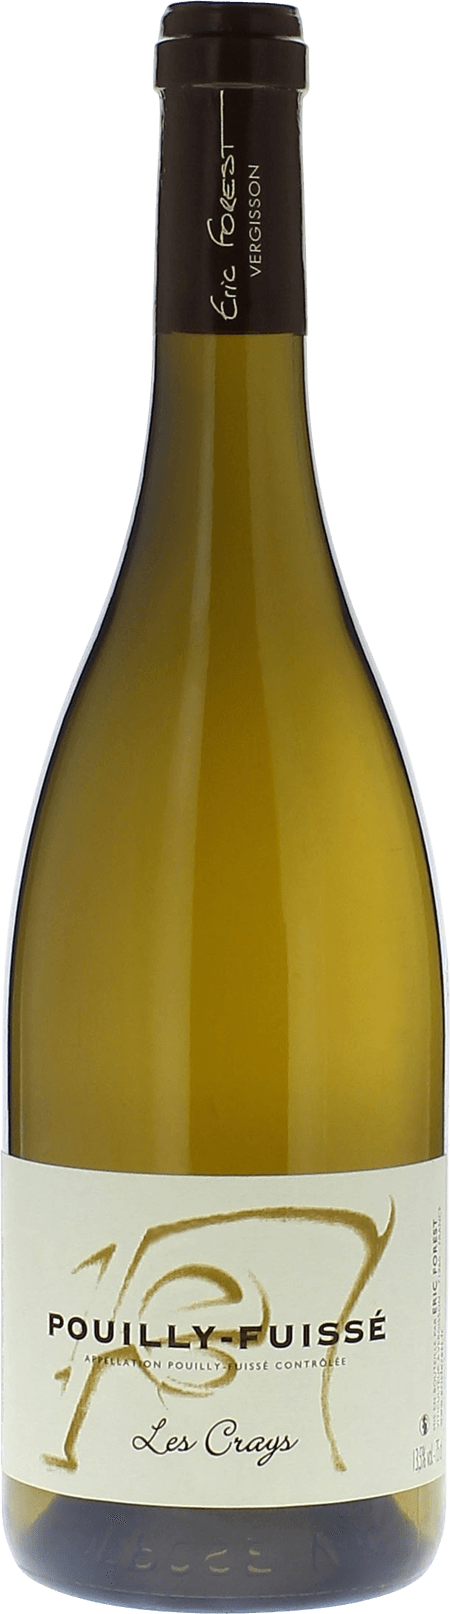 Pouilly fuiss les crays 2018 Domaine Eric Forest, Bourgogne blanc